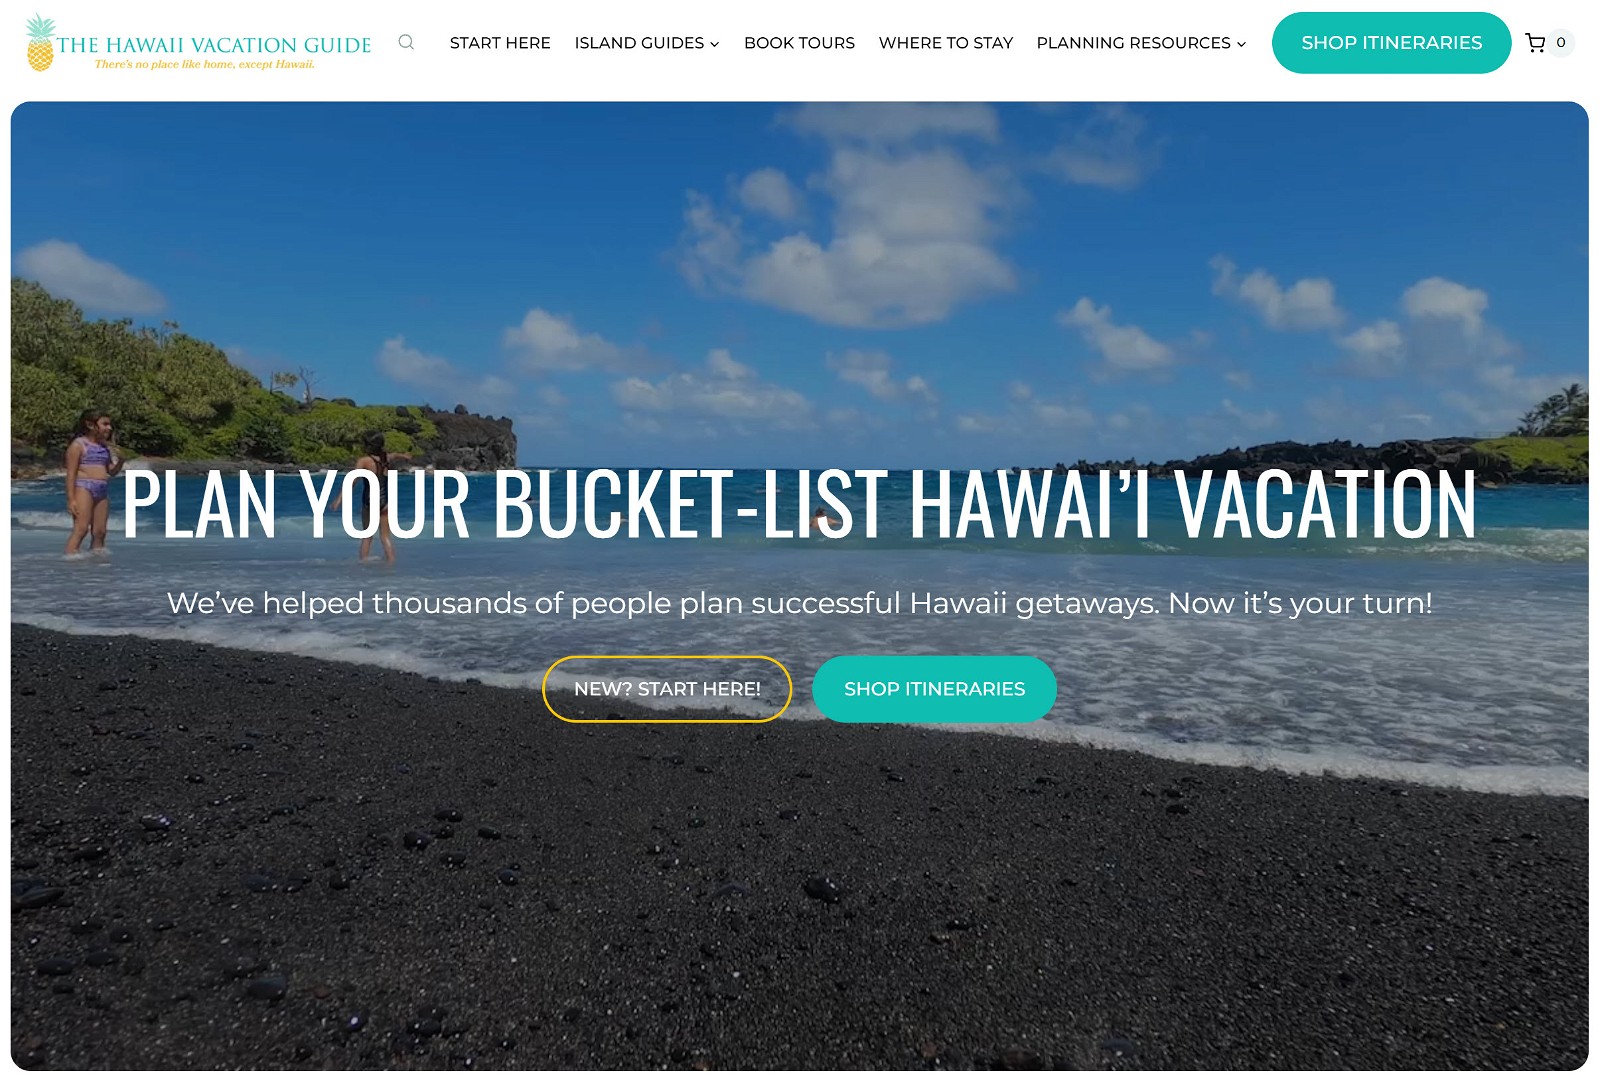 The Hawaii Vacation Guide homepage